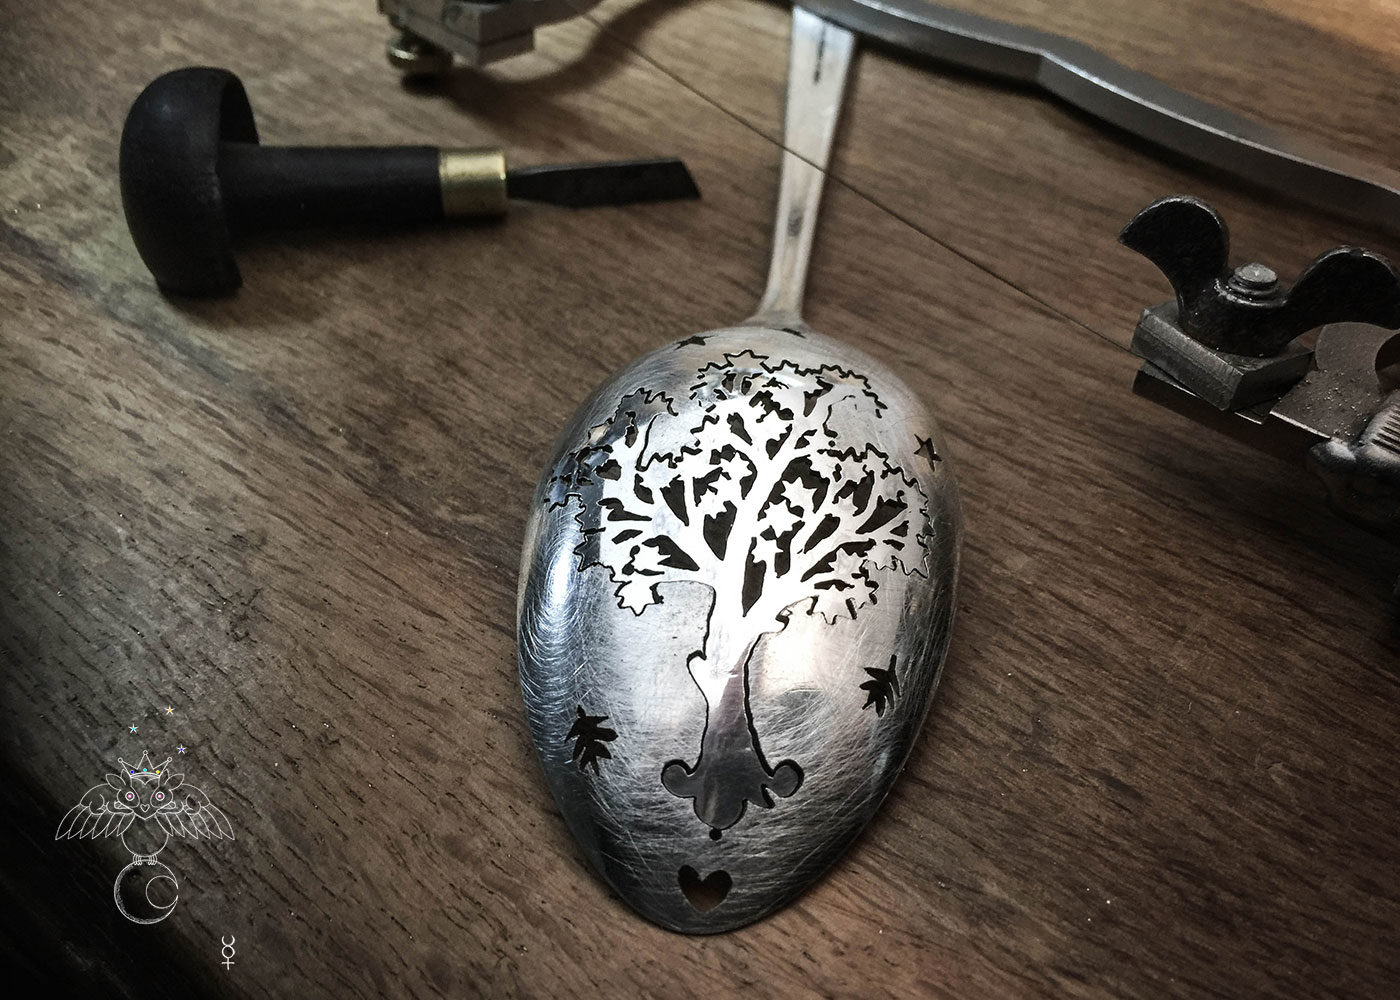 World tree jewellery - handmade and recycled antique spoon